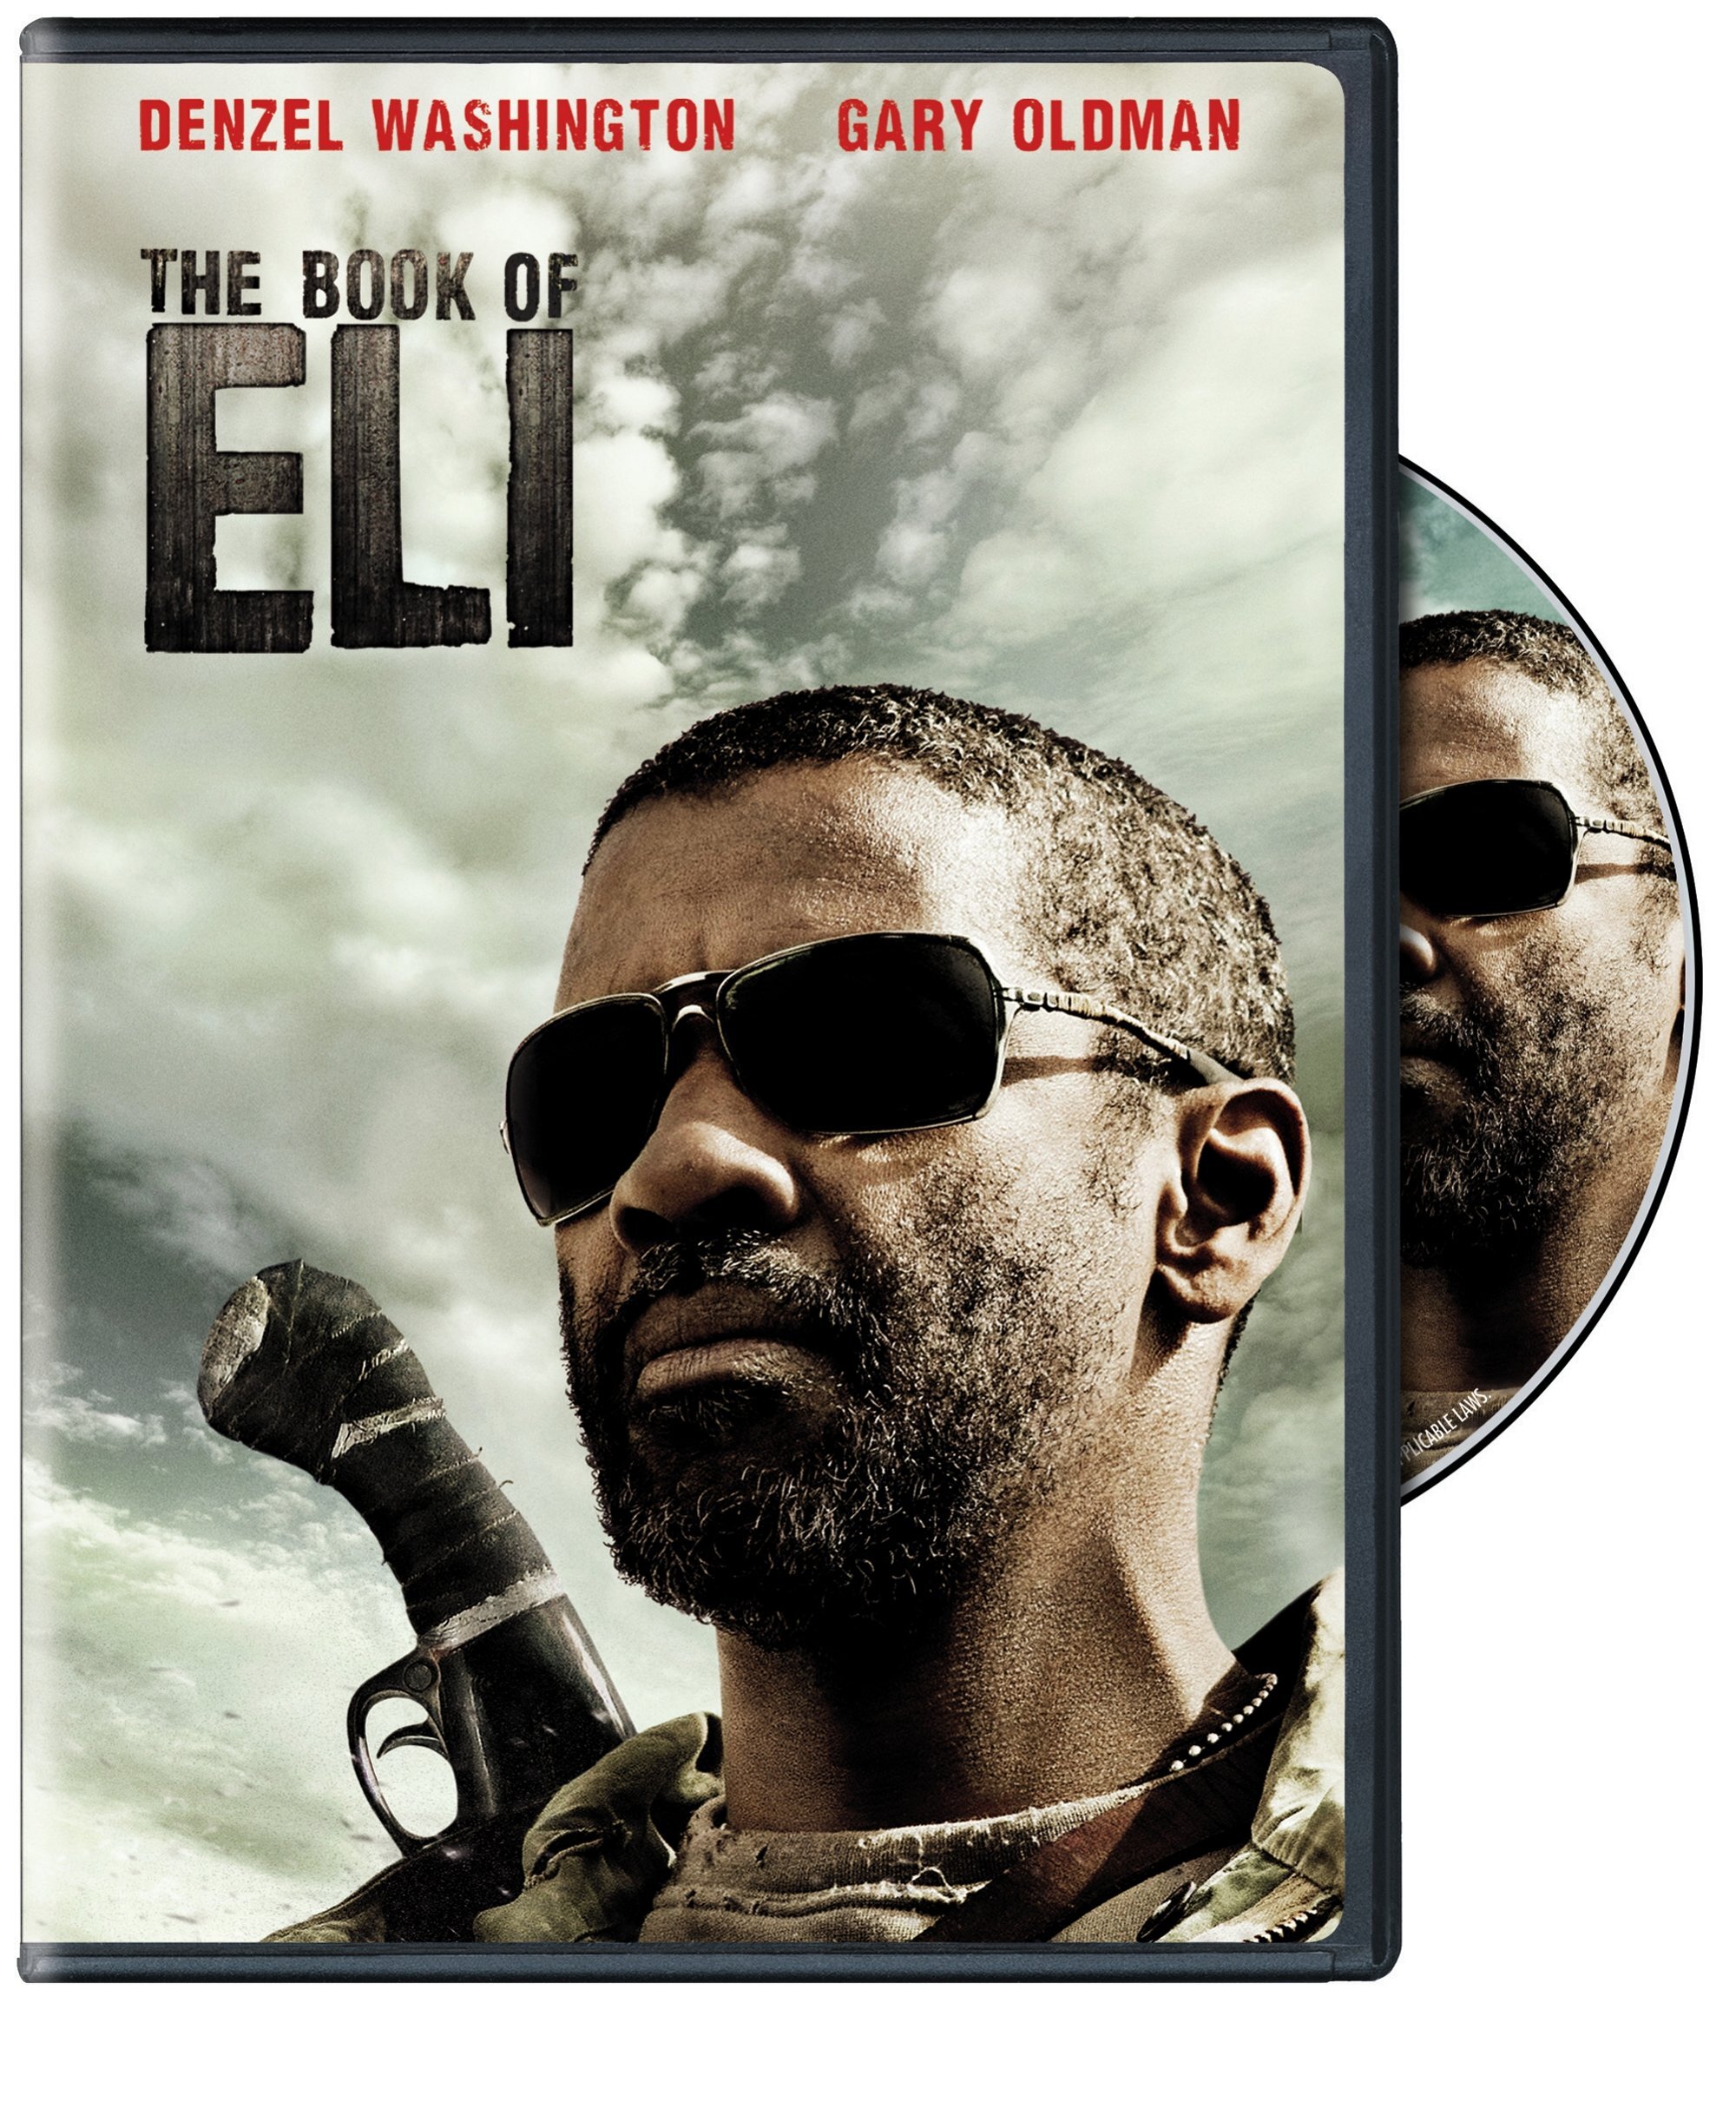 The Book Of Eli (DVD Widescreen) - DVD [ 2010 ]  - Action Movies On DVD - Movies On GRUV